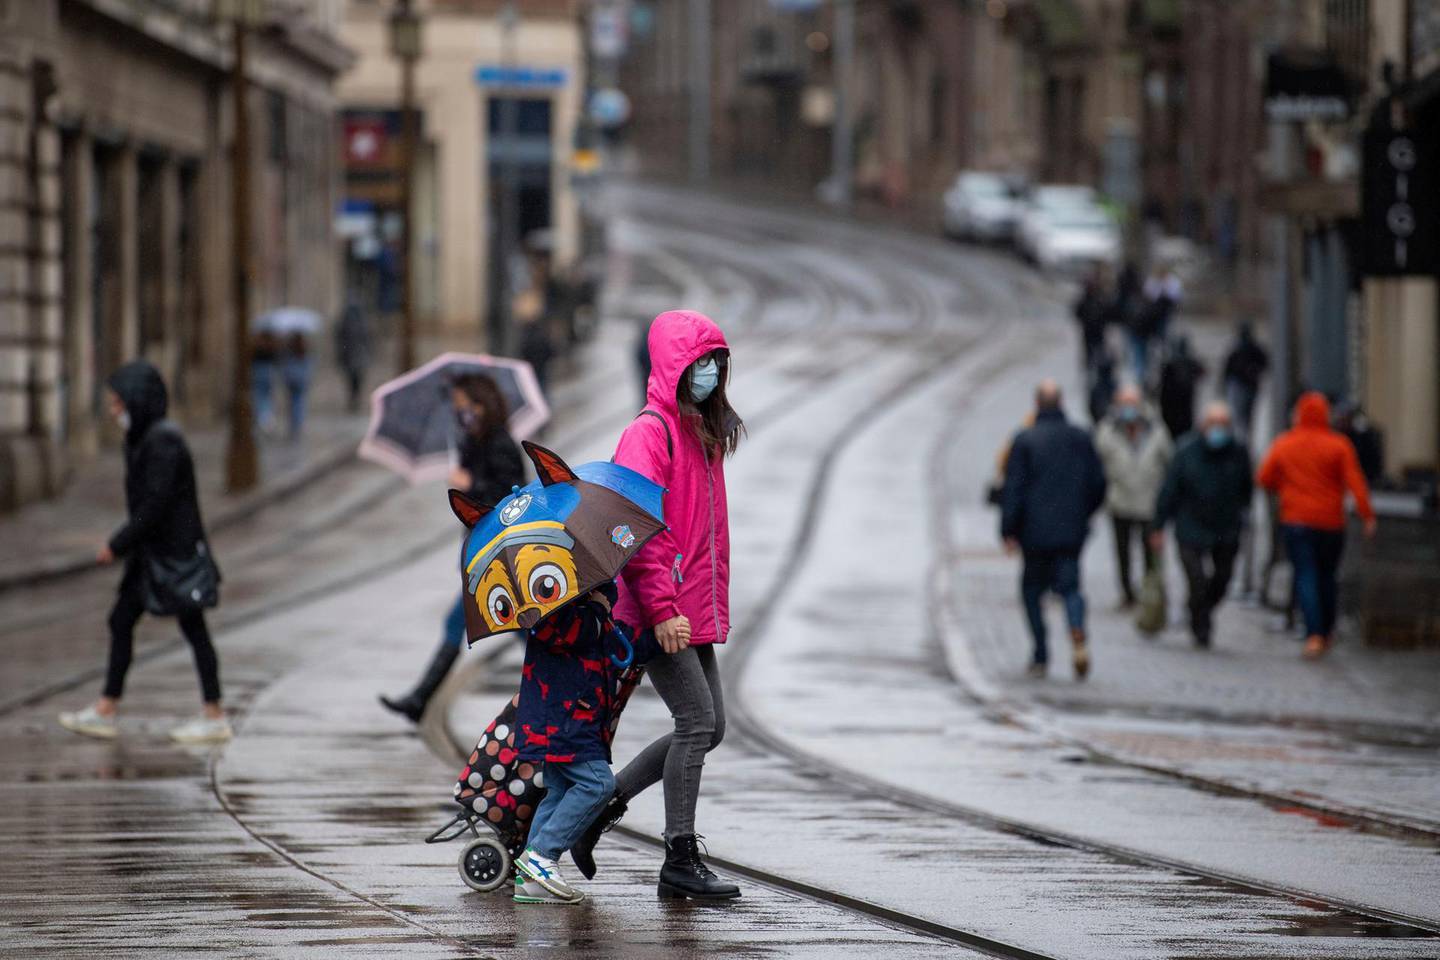 Many people wearing face masks as they move along a shopping street as rain falls in Nottingham, England, Tuesday Oct. 27, 2020.  The Nottingham area will move into the Tier 3 highest level of coronavirus restrictions on upcoming Thursday because of a surge in COVID-19 cases.  (Joe Giddens/PA via AP)